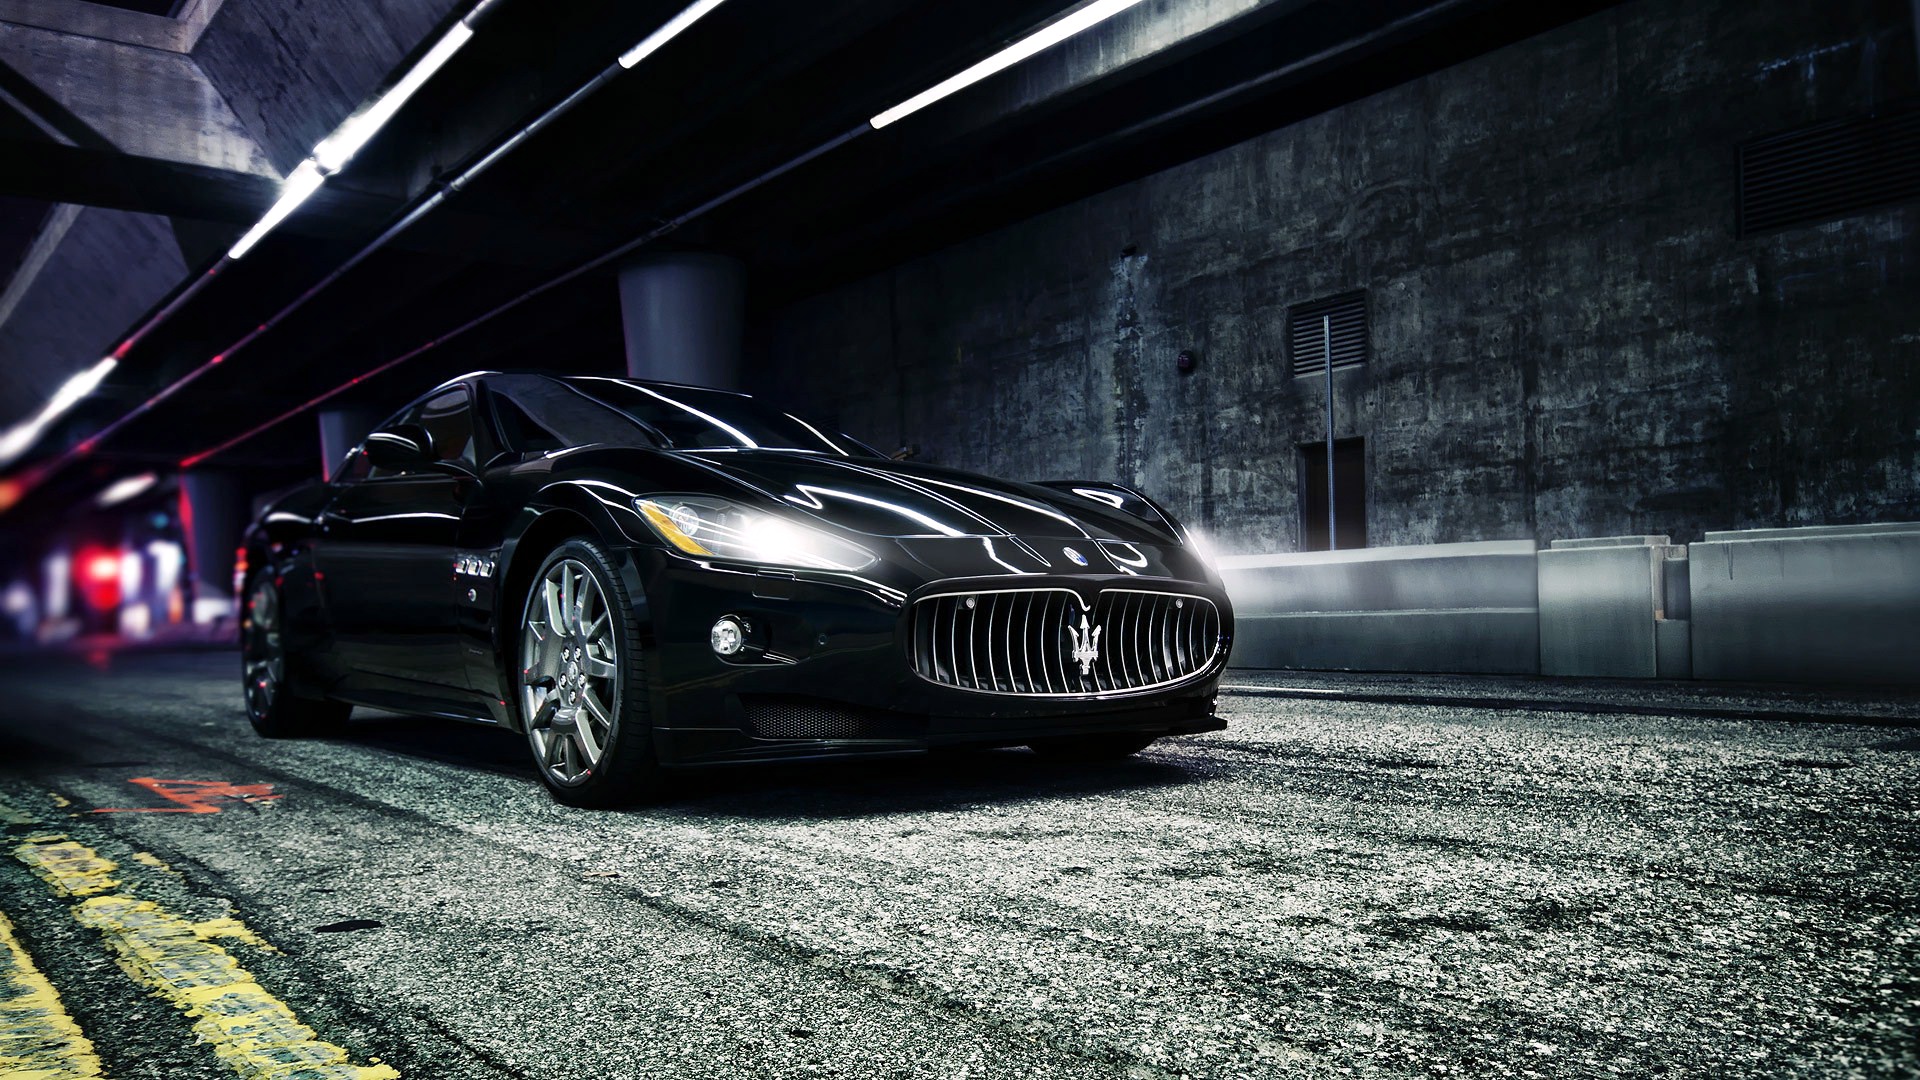 Maserati on HD Wallpapers for your desktop New Maserati Ghibli on